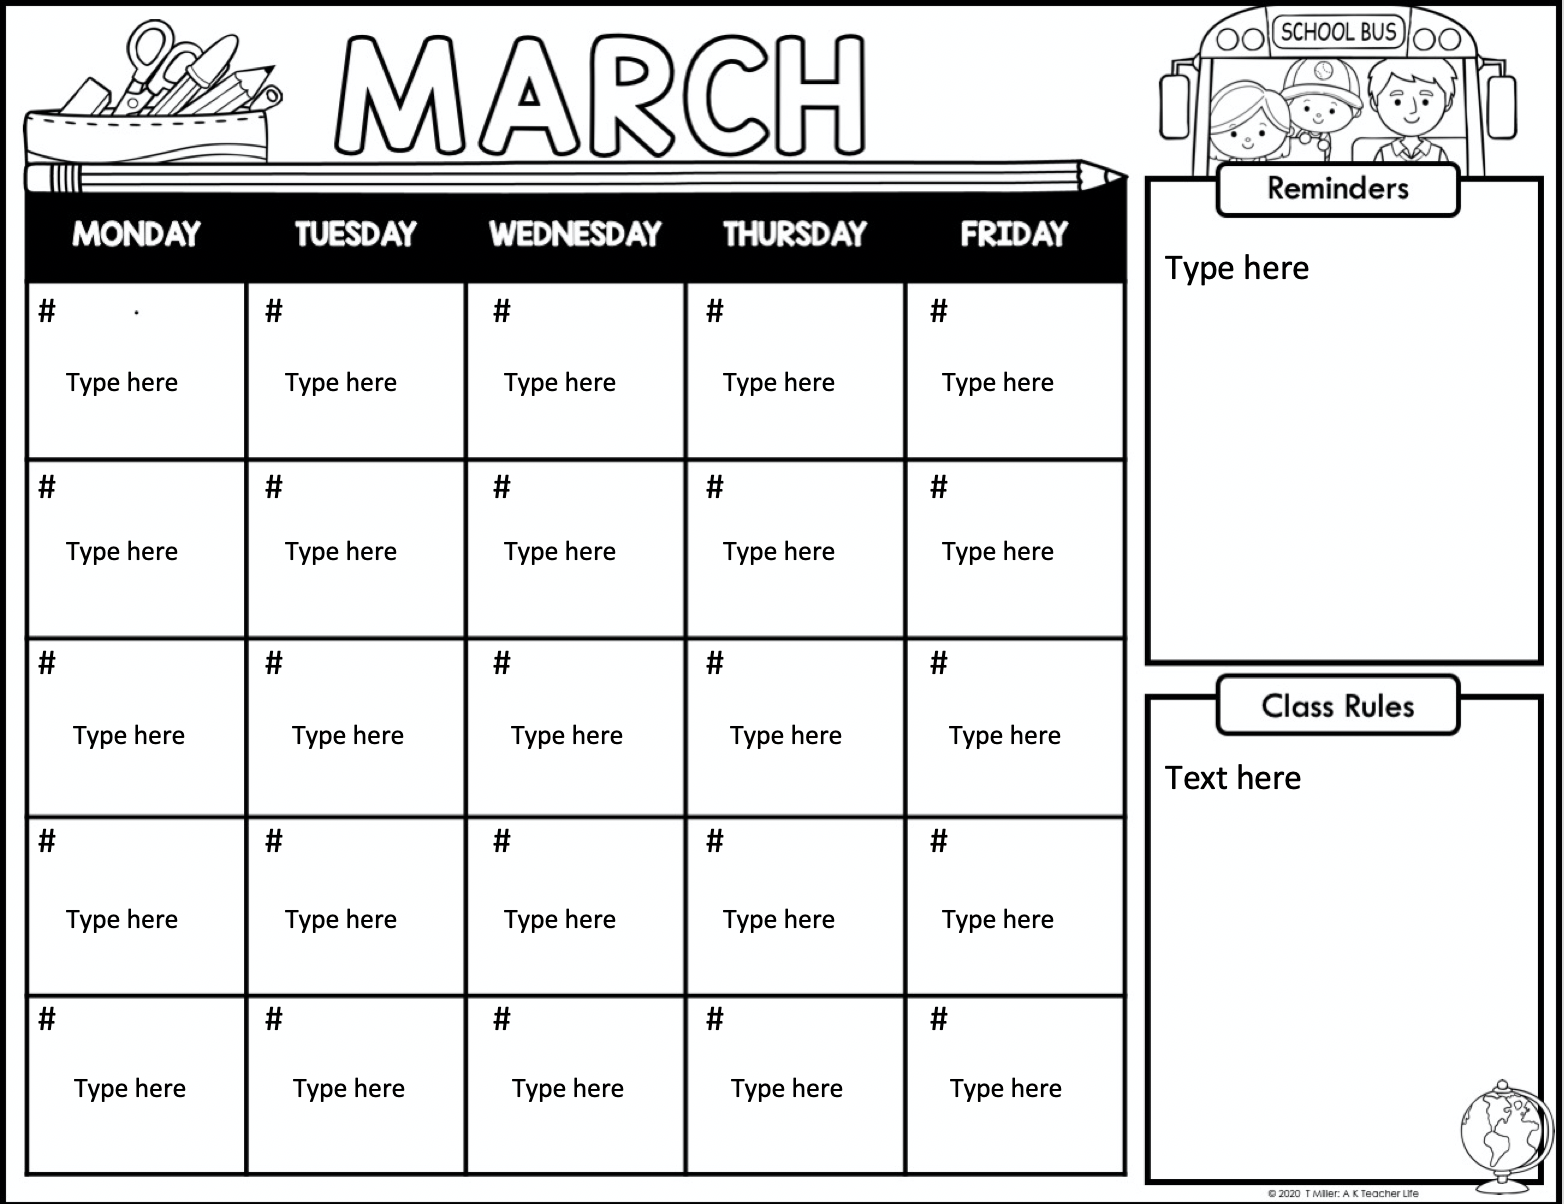 Download these free, monthly, editable classroom calendars. 